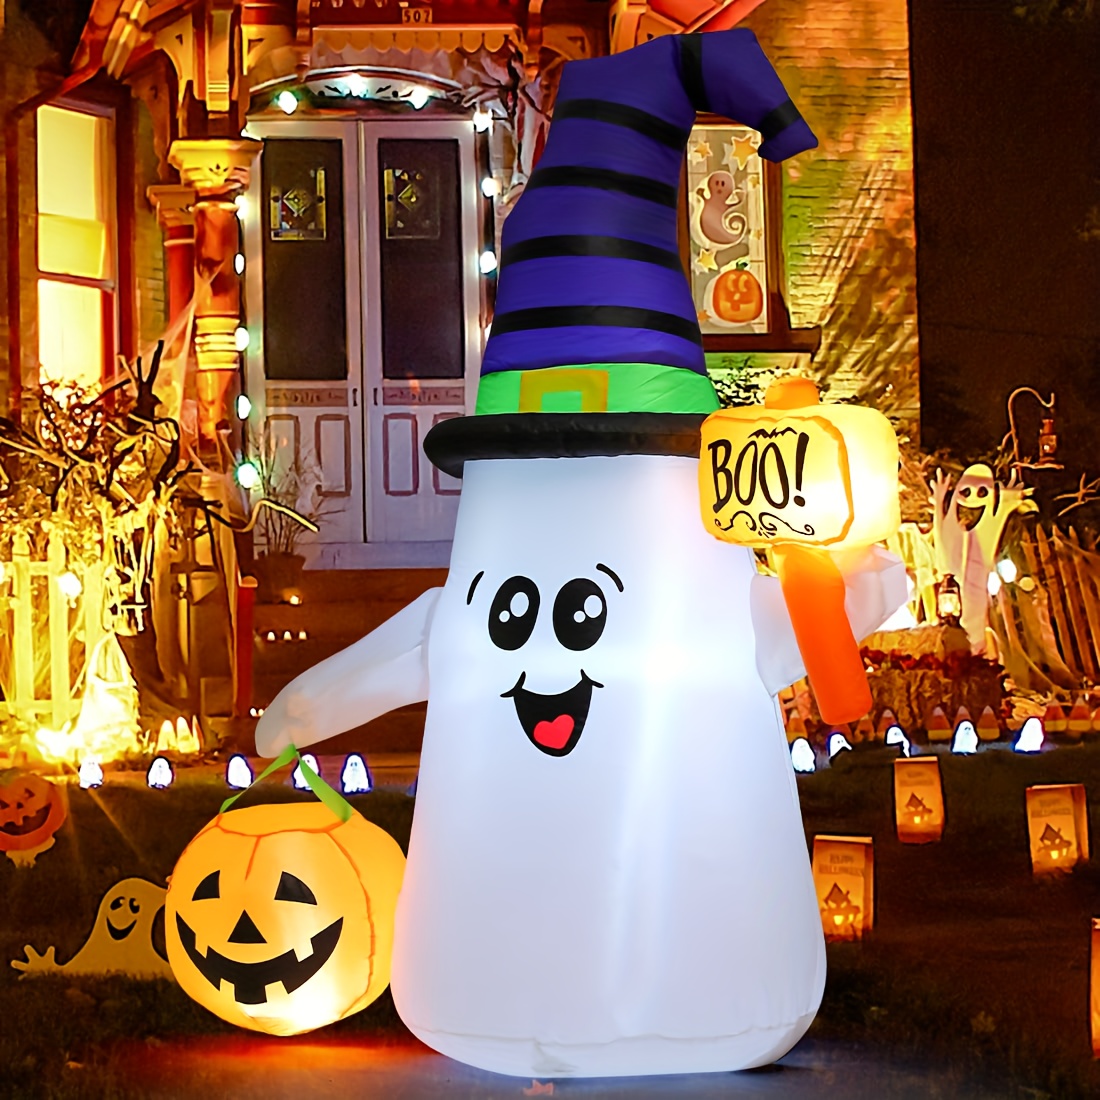 inflatable halloween cute ghost with pumpkin blow up inflatable halloween outdoor yard decoration for indoor outdoor yard party halloween decor light details 3